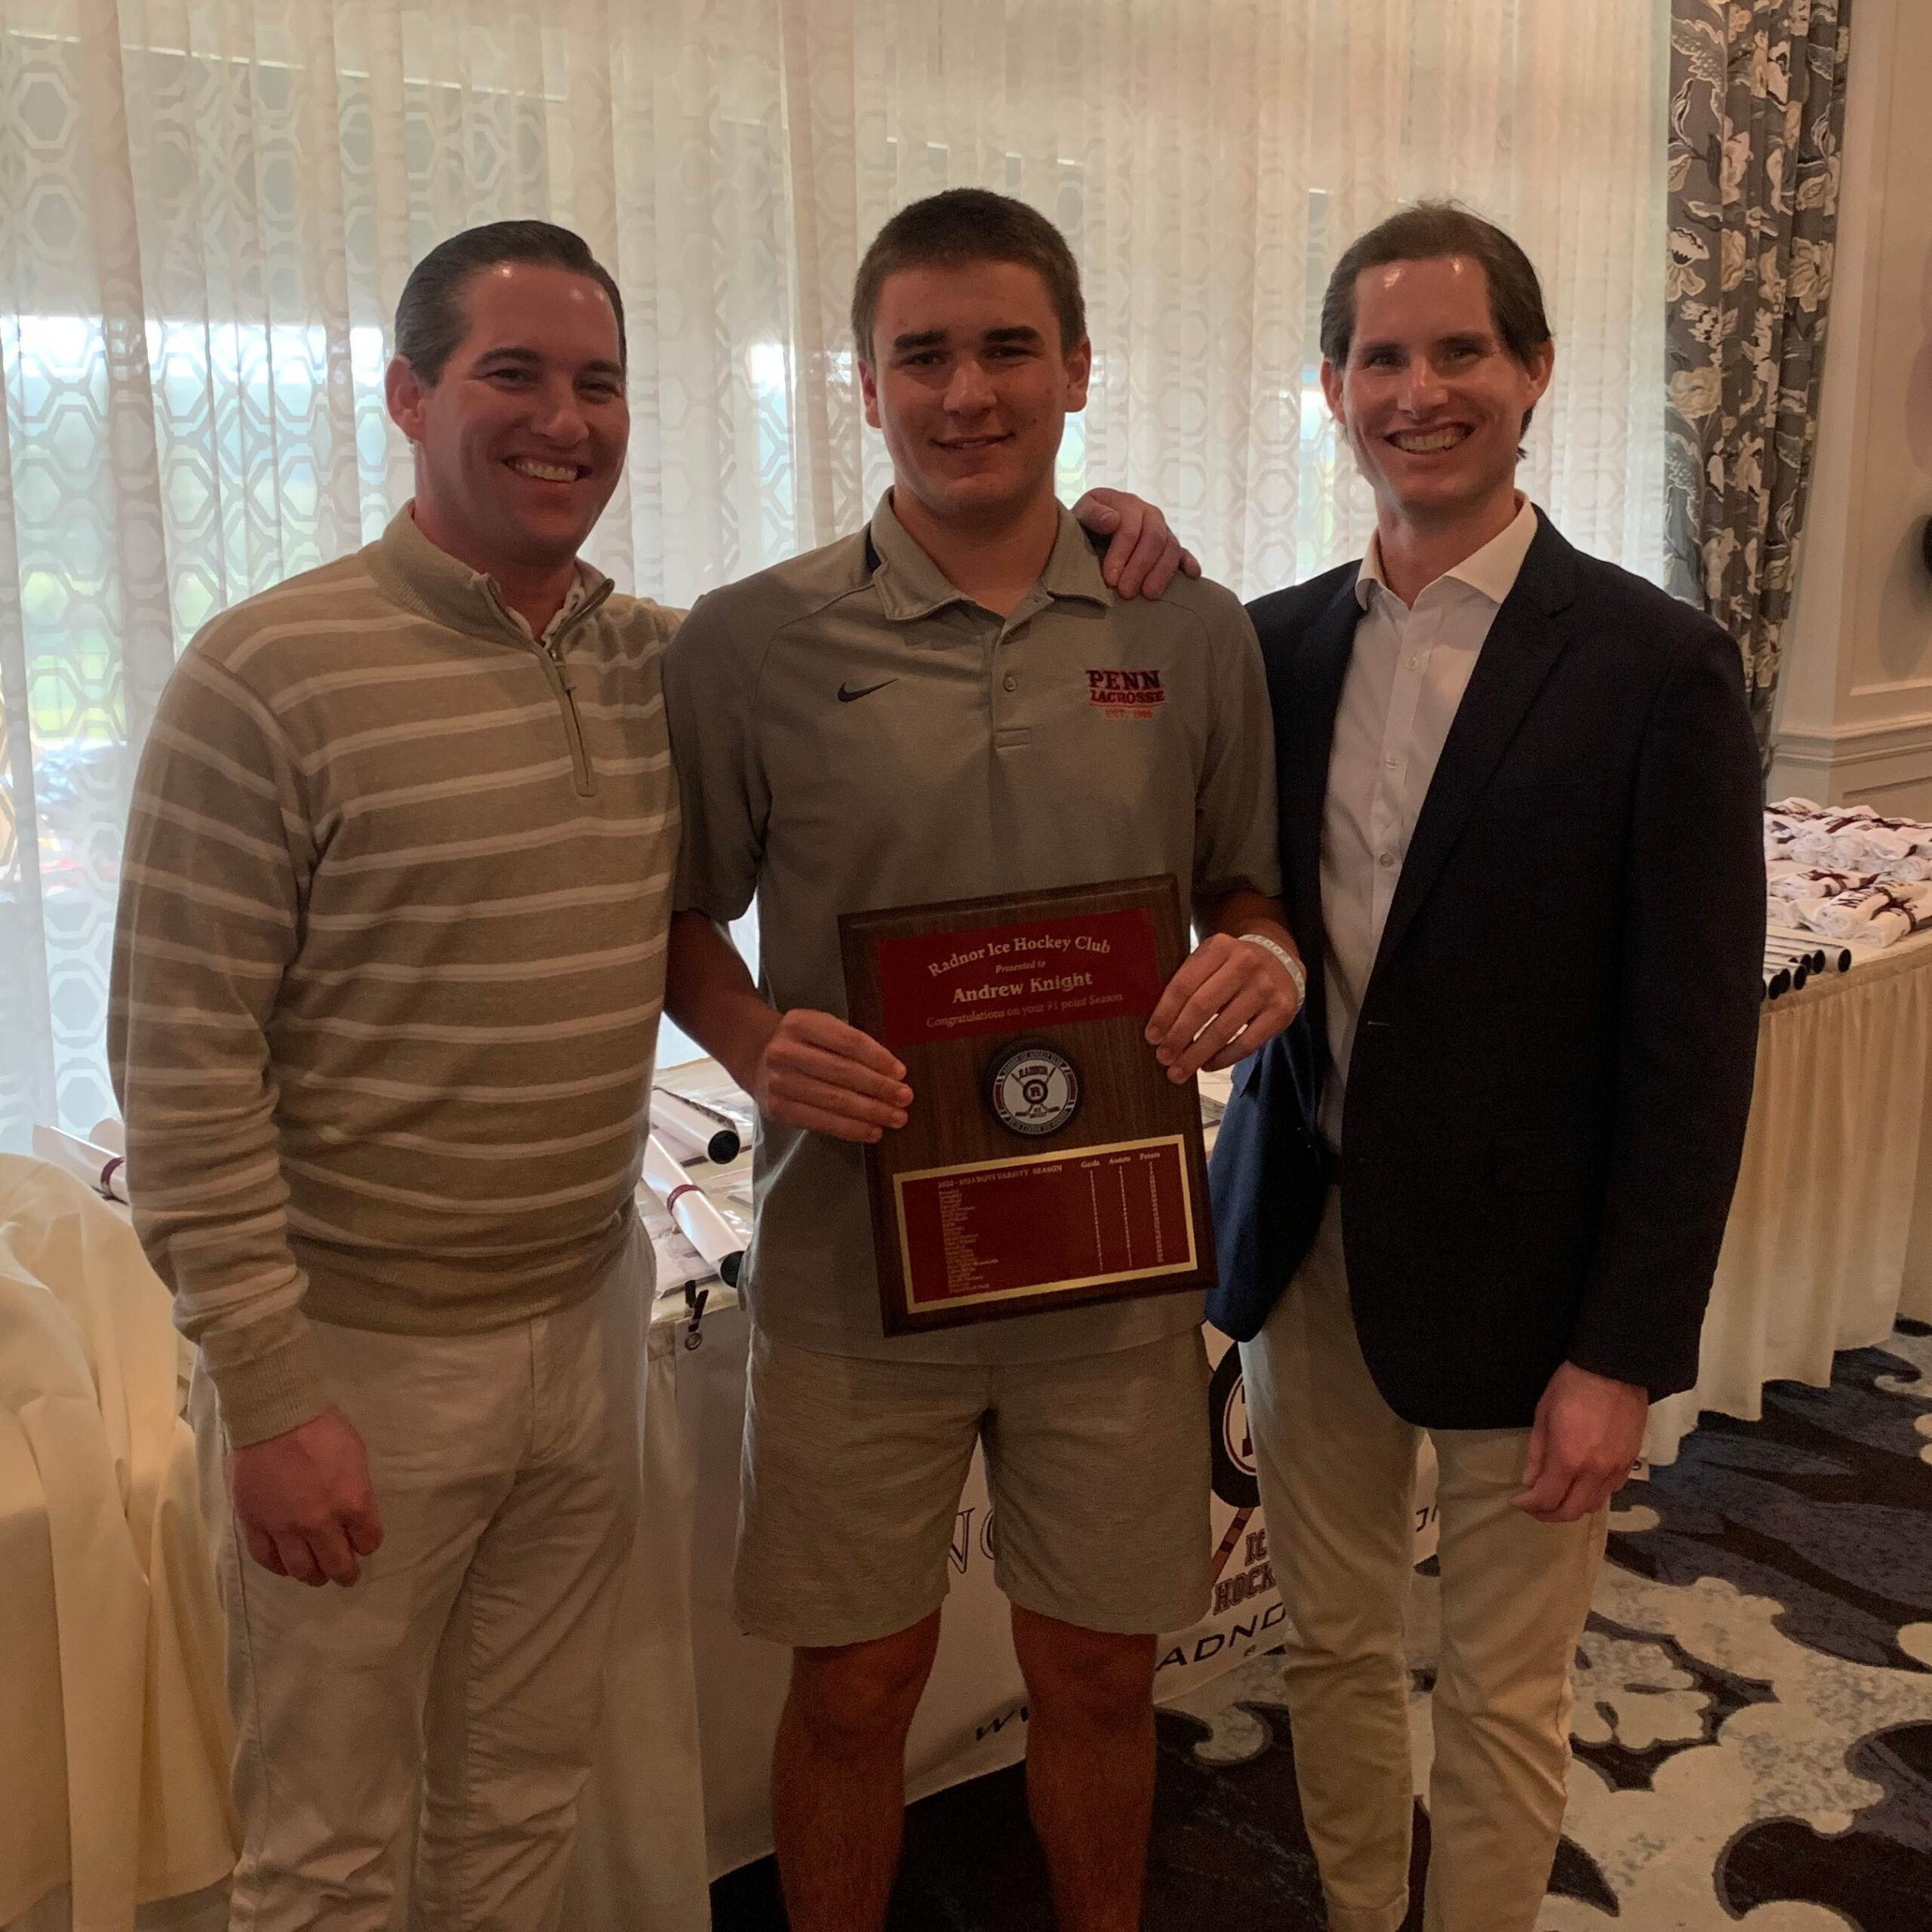 Chris and John Brennan joined us at the RIHC End of the Year banquet to present Drew Knight a plaque to commemorate Drew’s accomplishment of scoring 91 points this season and his selection as All-Delco Player of the Year.